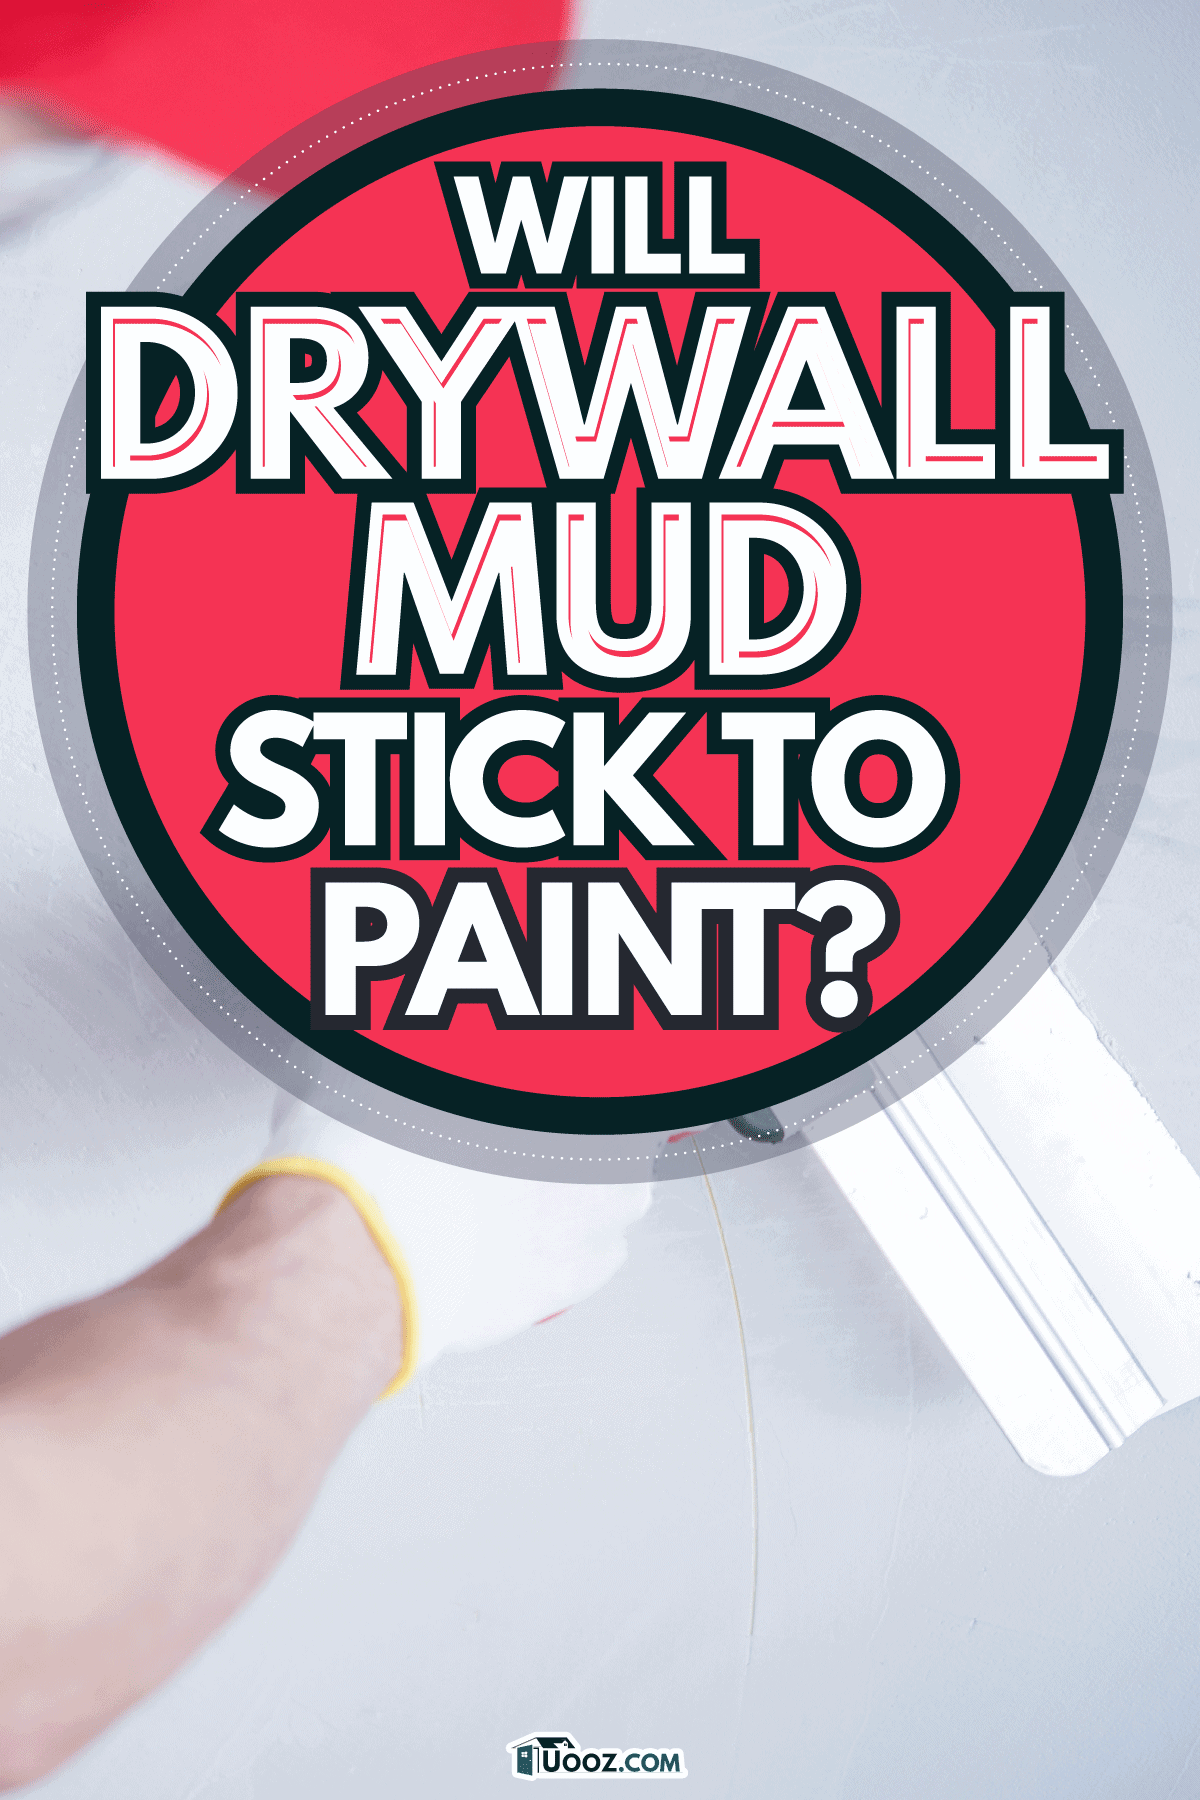 Will-Drywall-Mud-Stick-To-Paint3